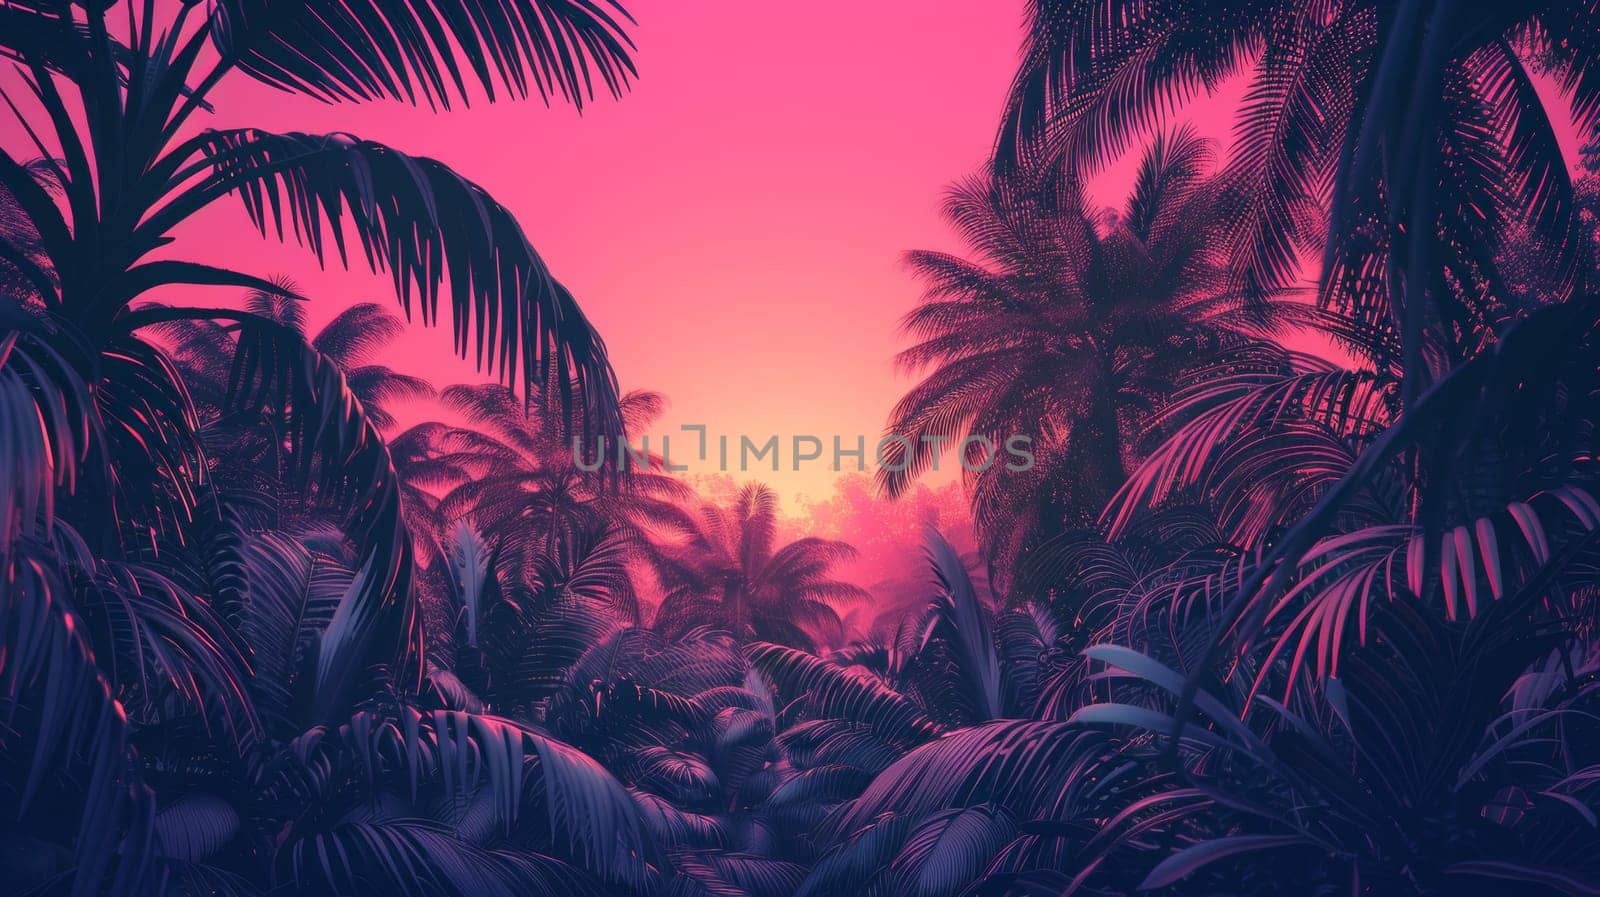 A pink and purple sunset with a jungle scene in the background